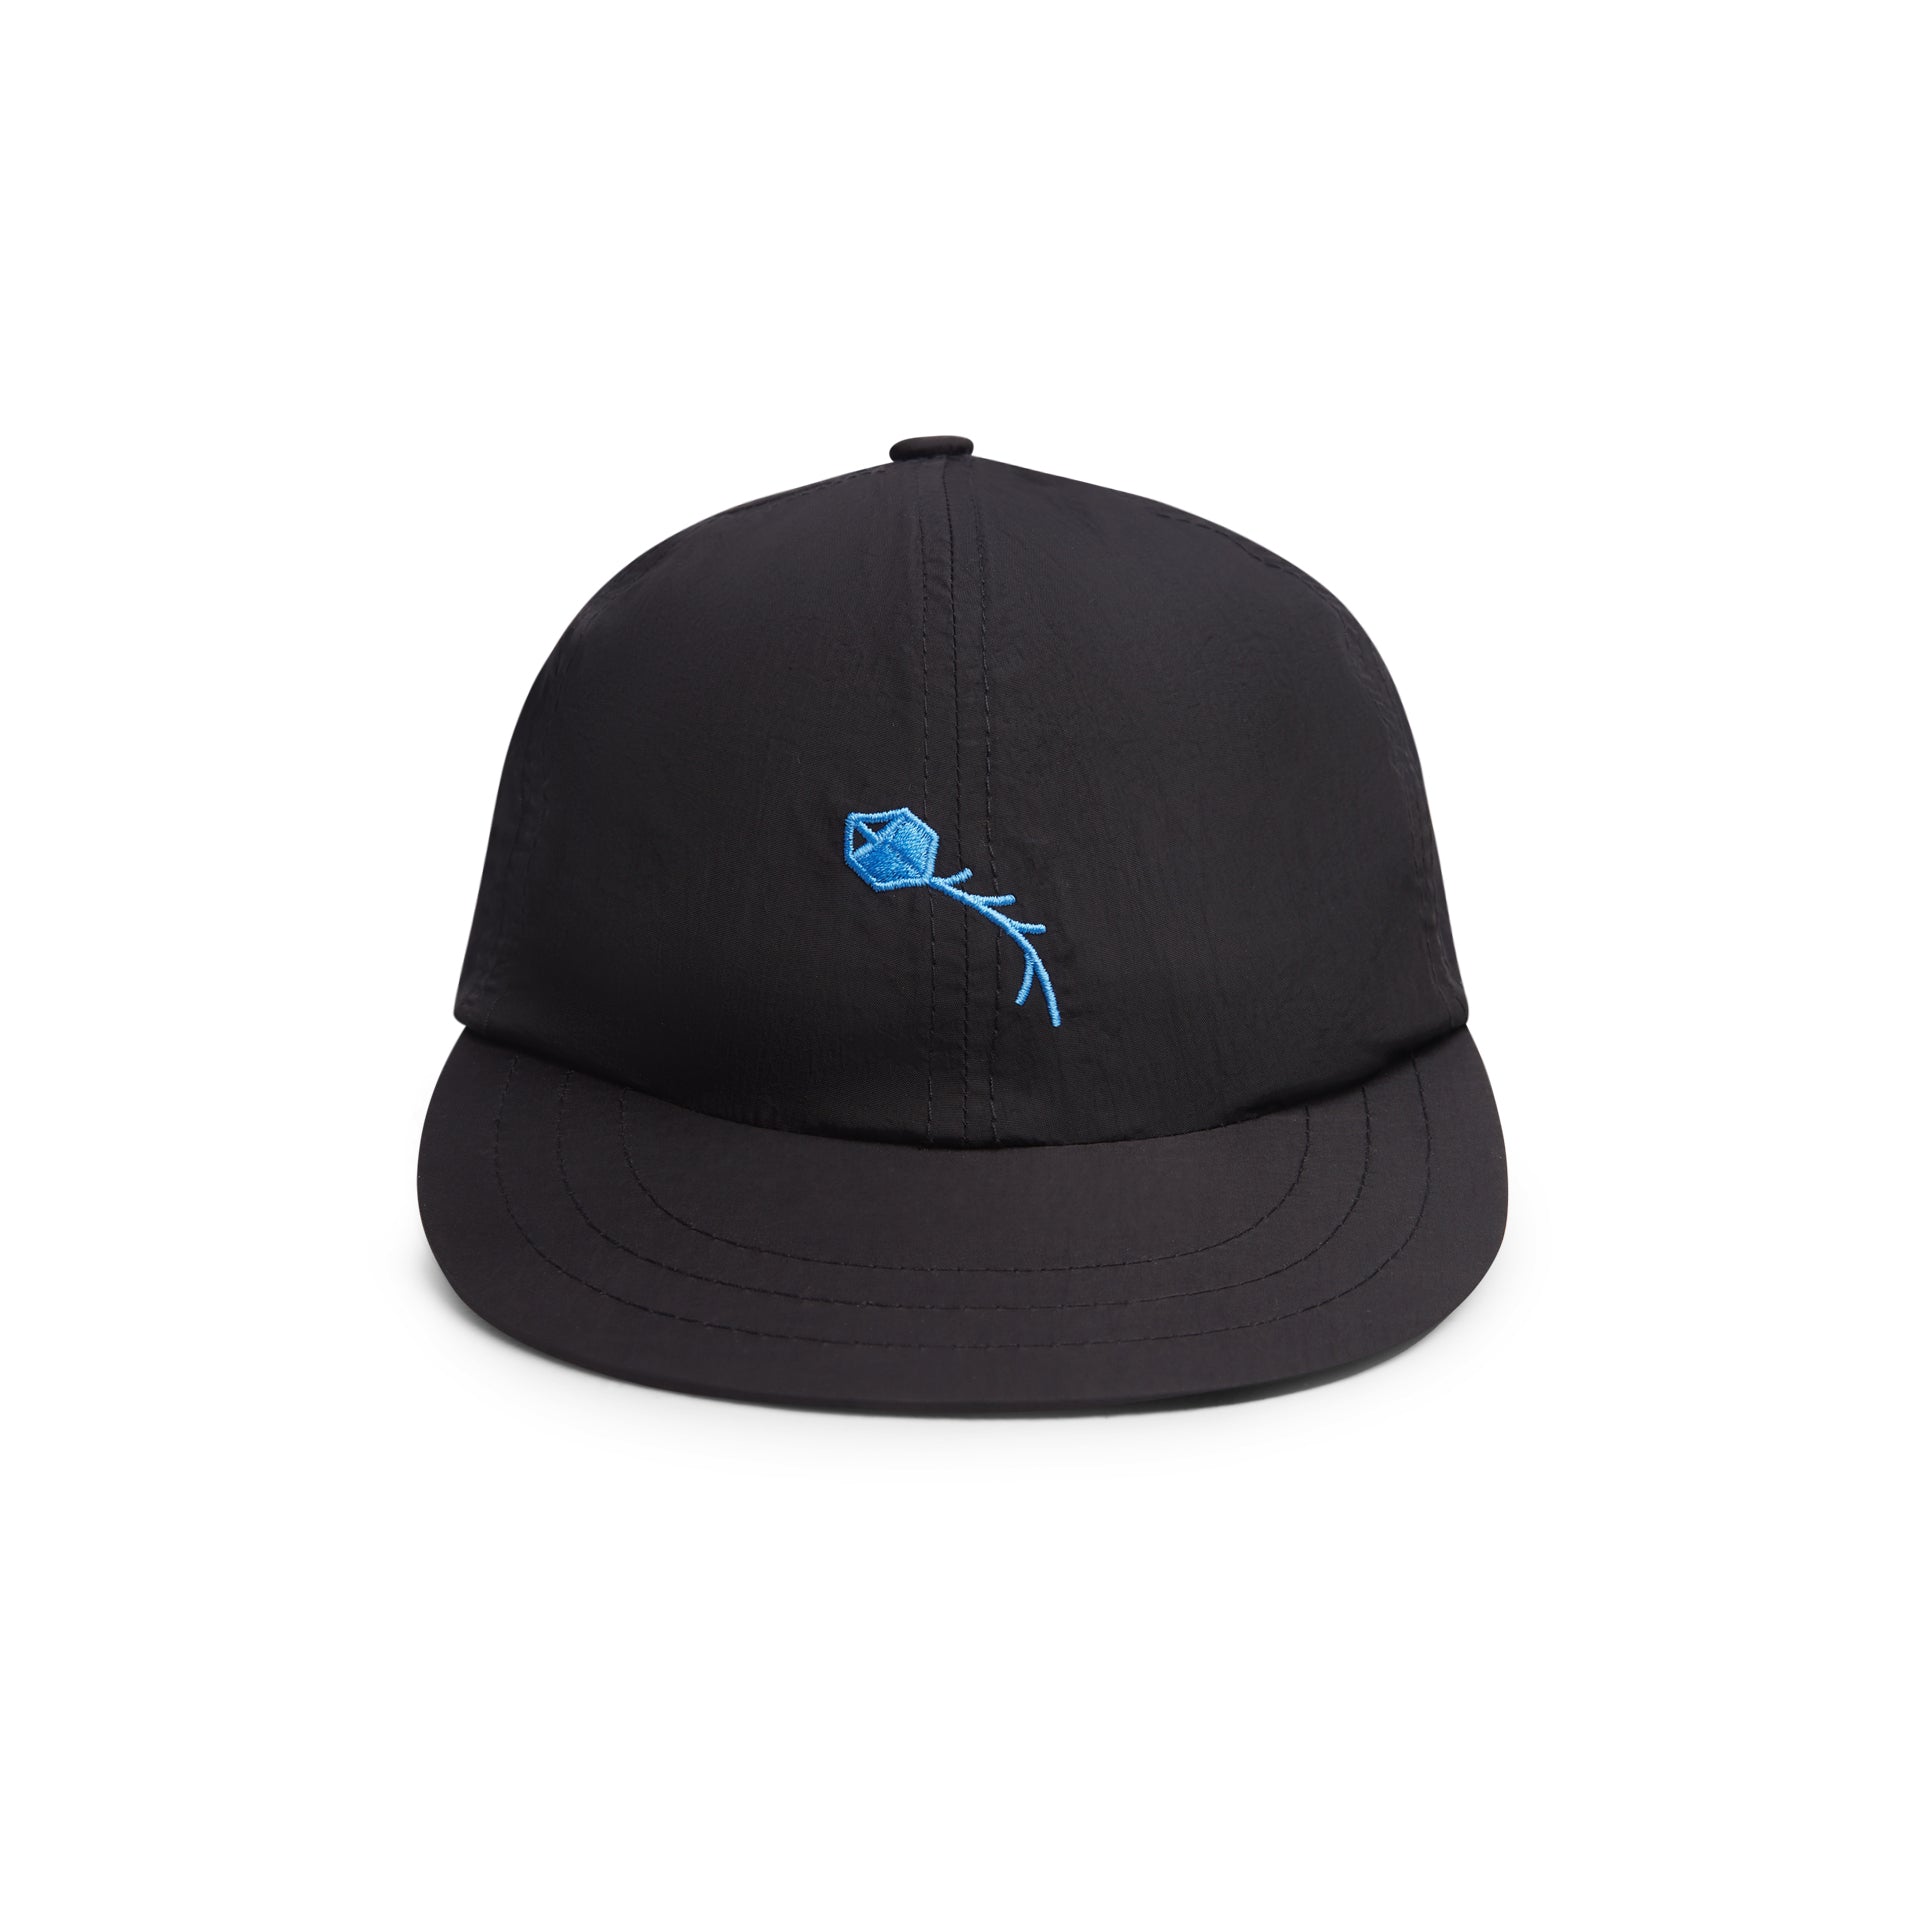 CLASS - Polo Hat Pipa "Black" - THE GAME